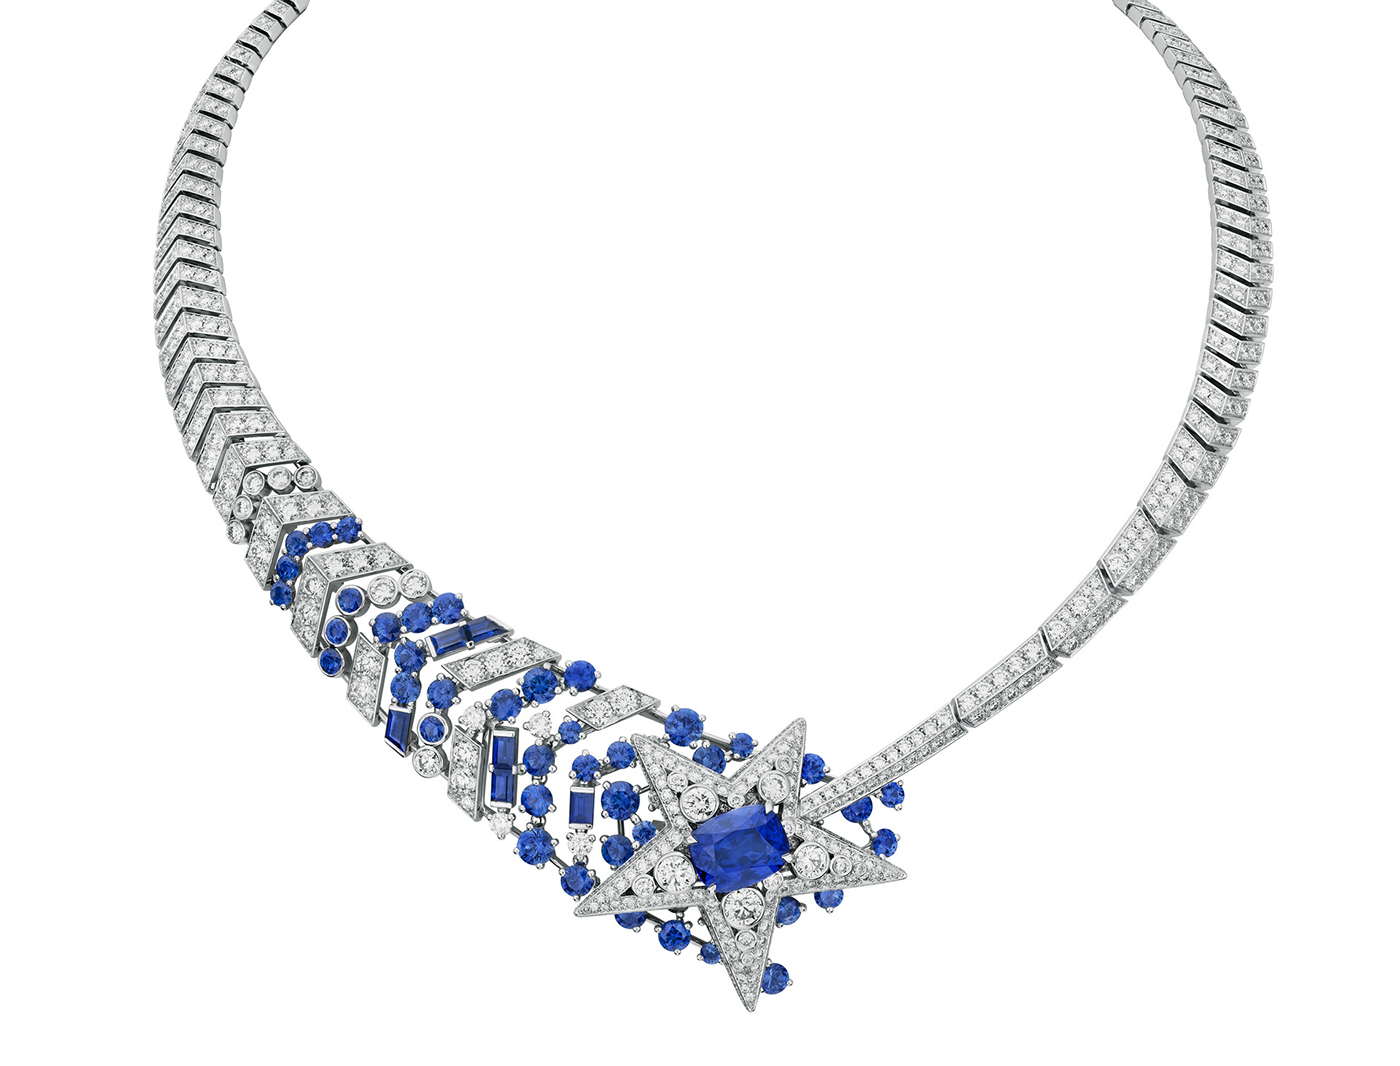 1932 Chanel High Jewellery Collection - The Edge Magazine